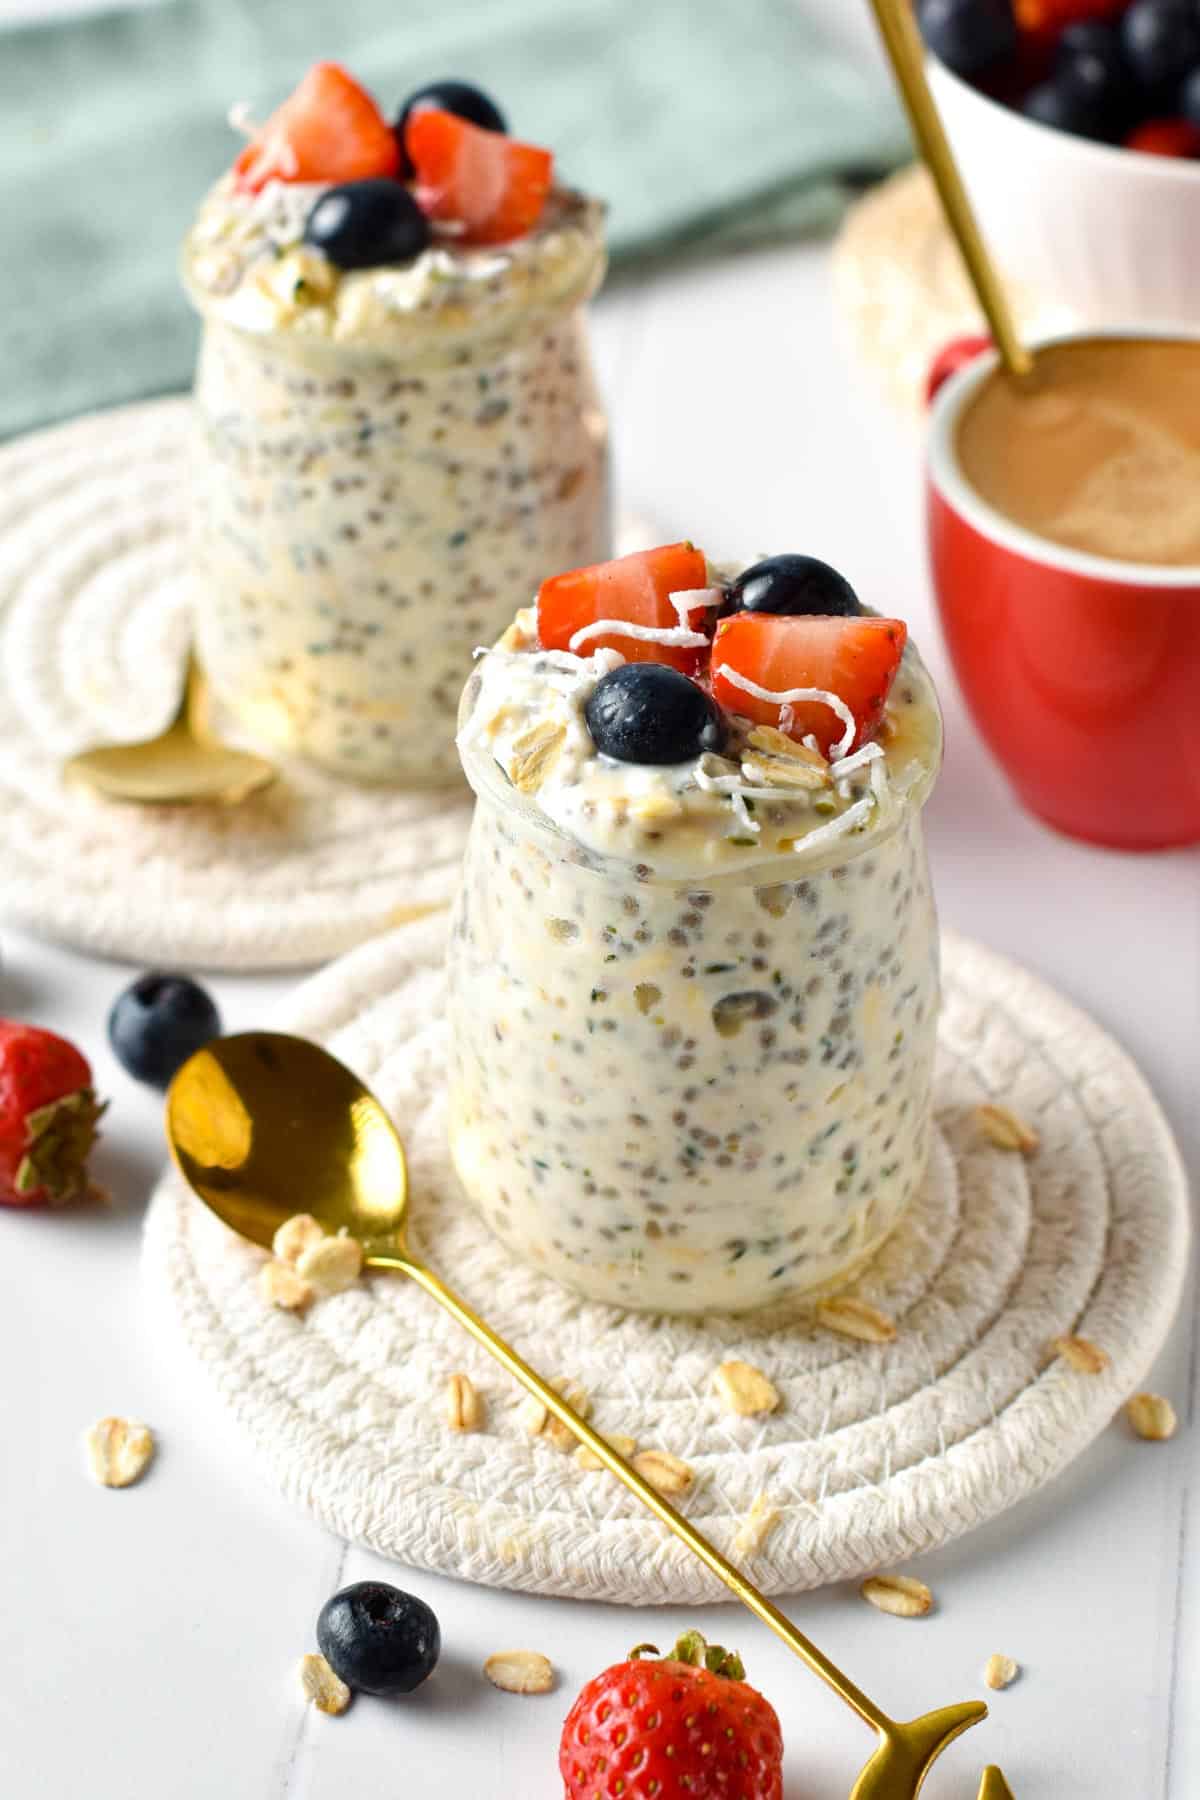 This Diabetic Overnight oat is a low-carb version of the classic overnight oat recipe using hemp heart and oat to boost protein, and healthy fats and cut down on carbs.This Diabetic Overnight oat is a low-carb version of the classic overnight oat recipe using hemp heart and oat to boost protein, and healthy fats and cut down on carbs.